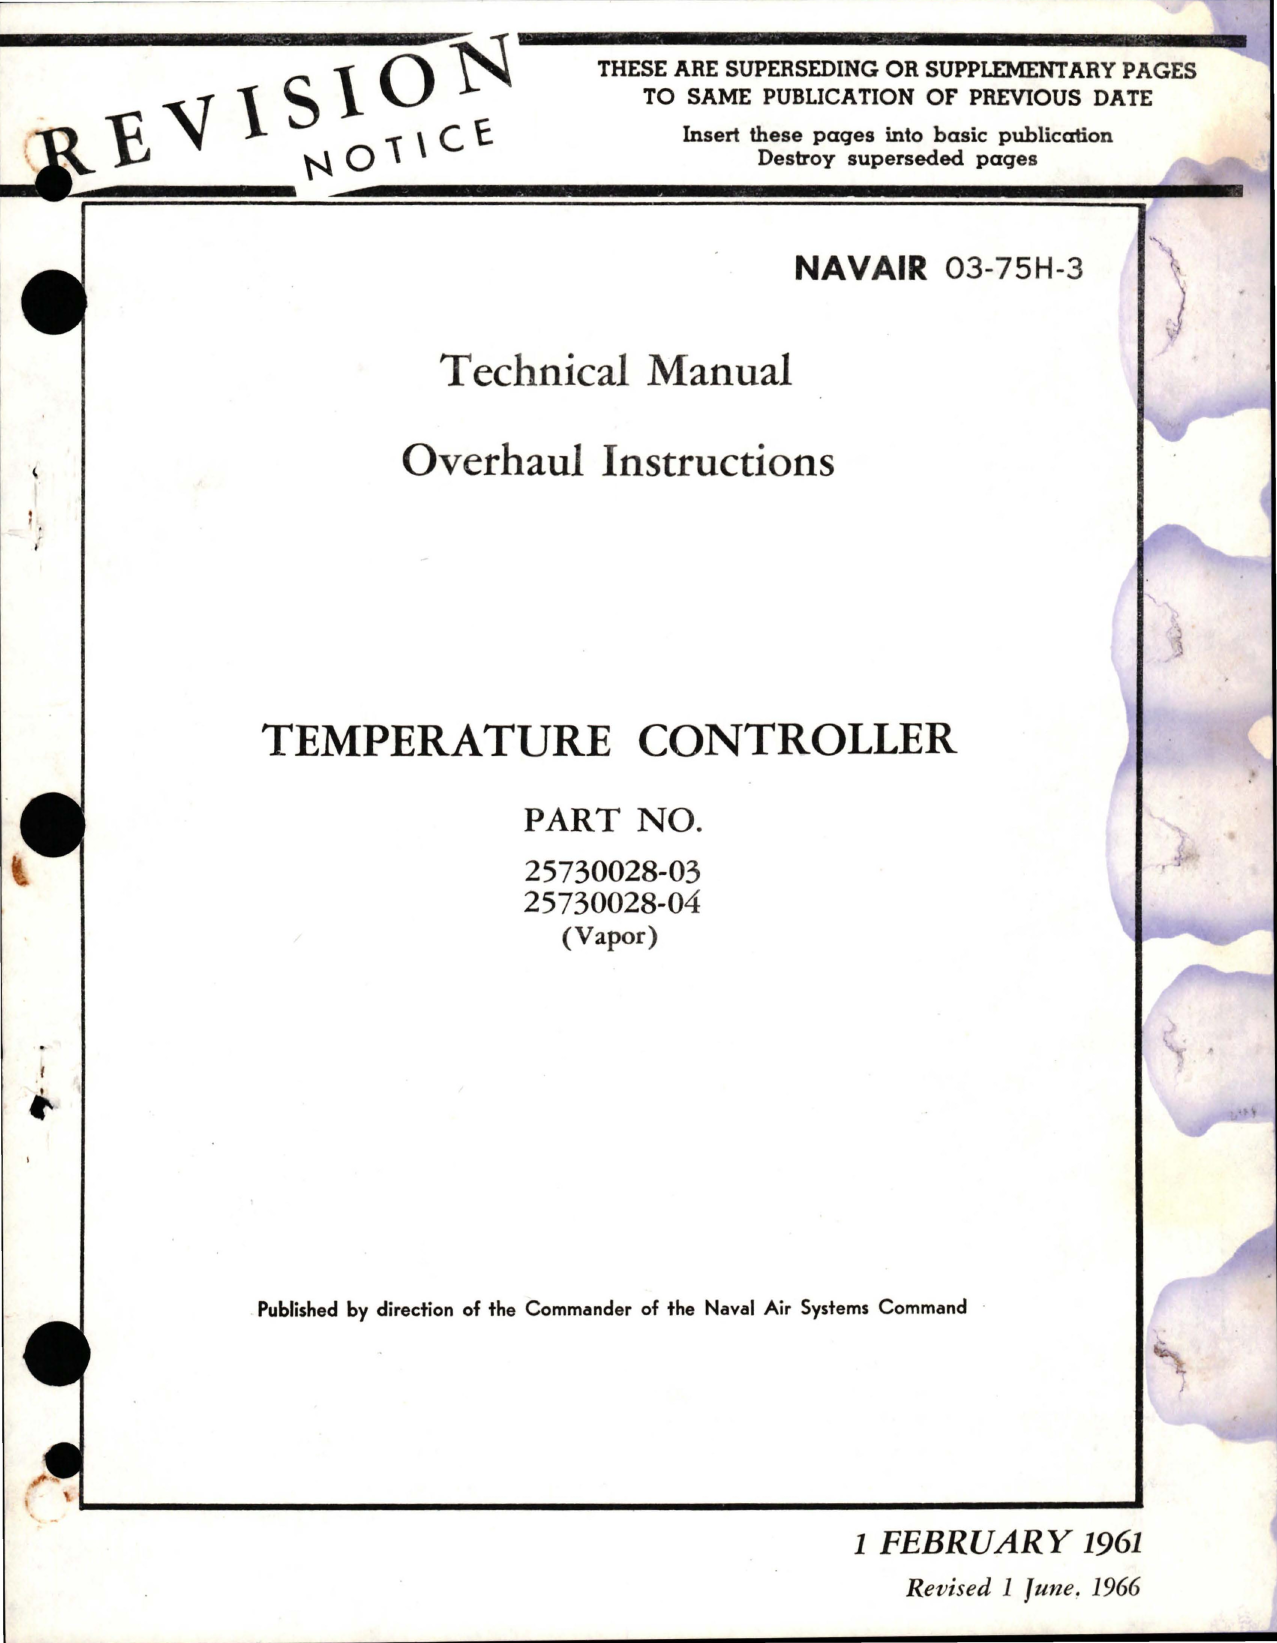 Sample page 1 from AirCorps Library document: Overhaul Instructions for Temperature Controller - Parts 25730028-03 and 25730028-04